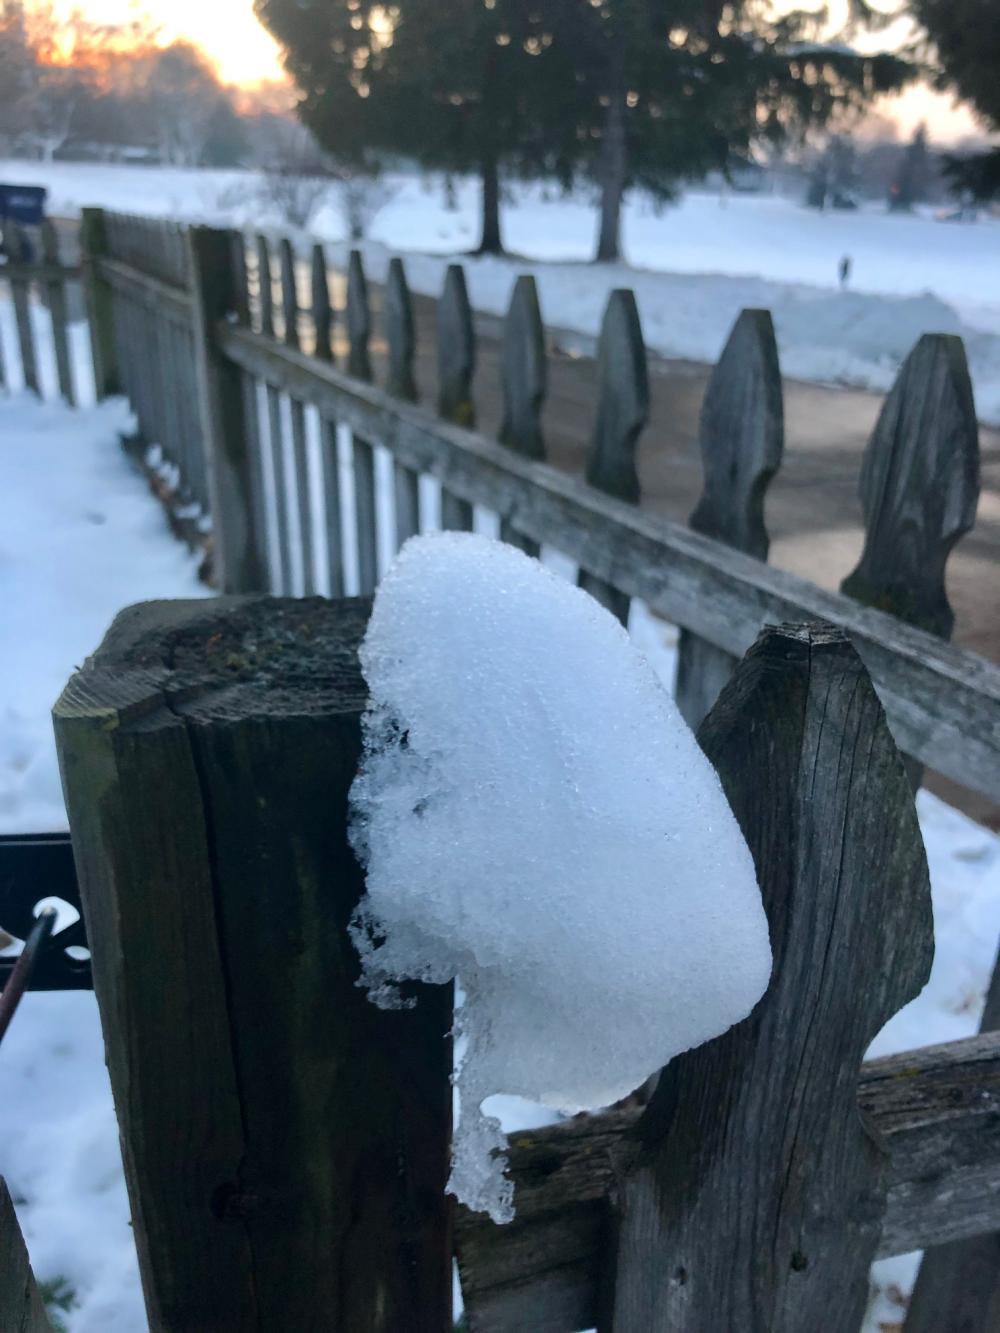 Snow still on the wooden fence